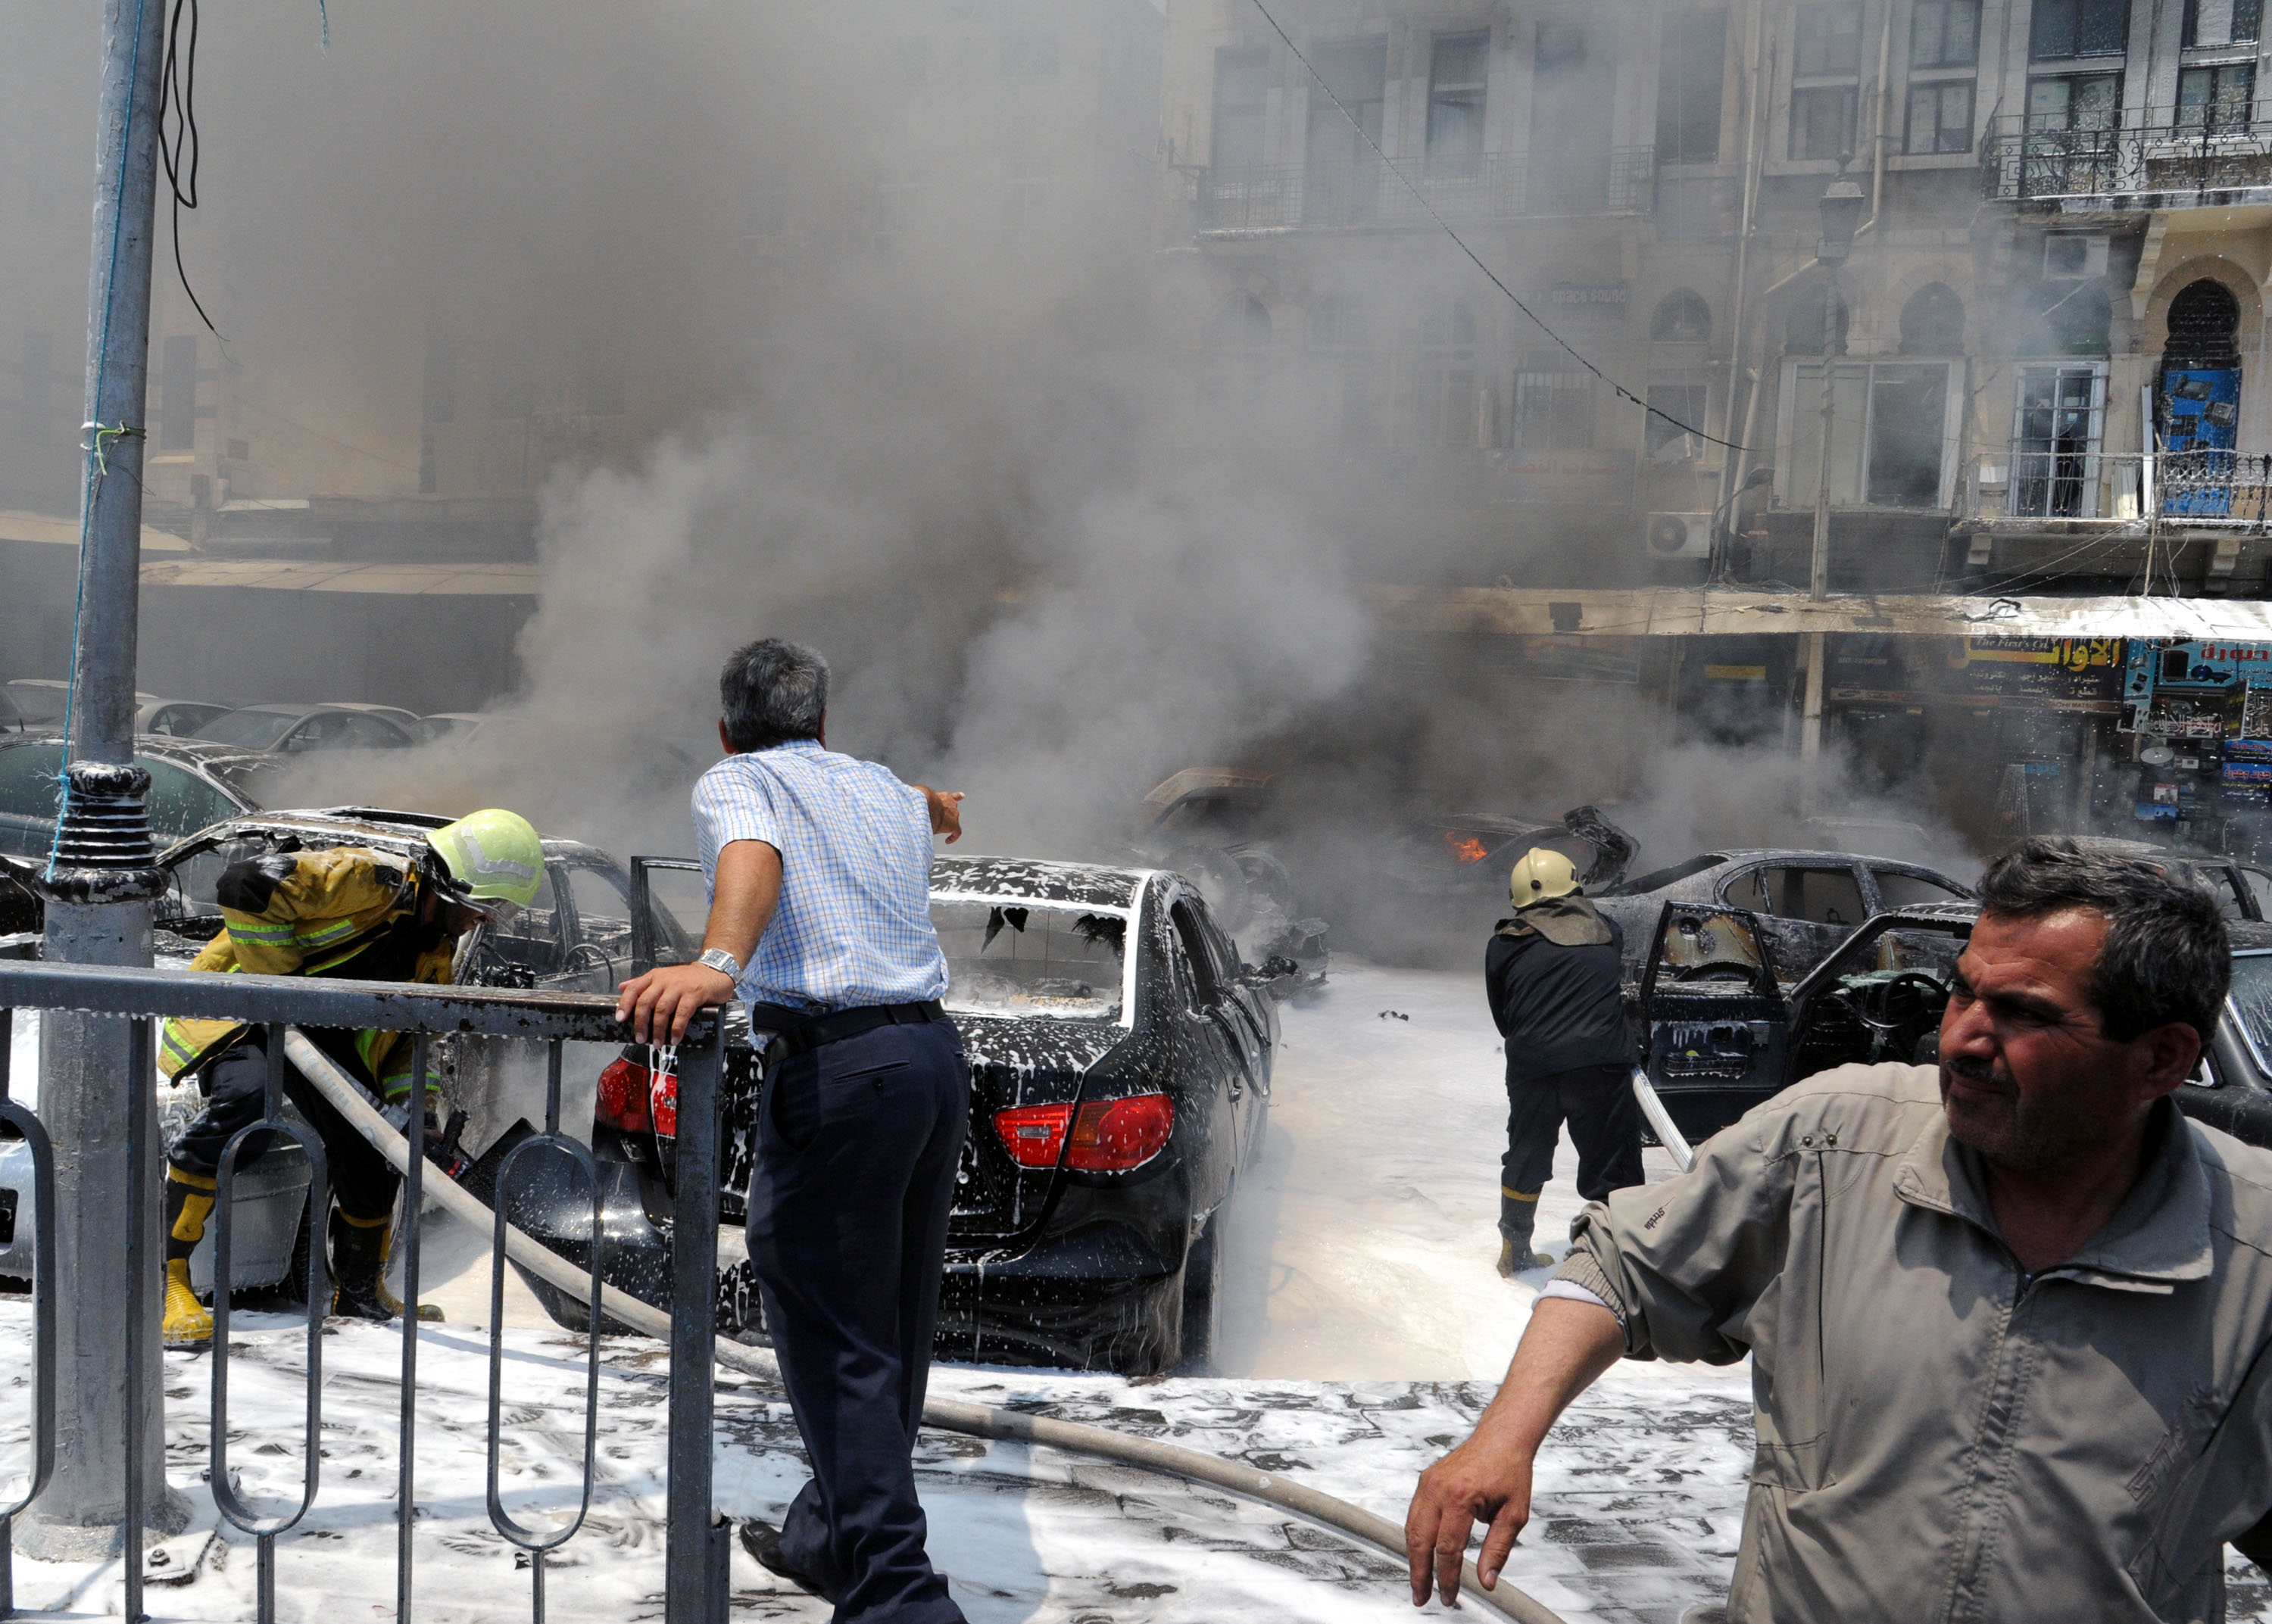 A picture released by the official Syrian news agency SANA shows men at the scene after two huge bombs exploded outside the Palace of Justice in Central Damascus on June 28, 2012 (AFP PHOTO/SANA)